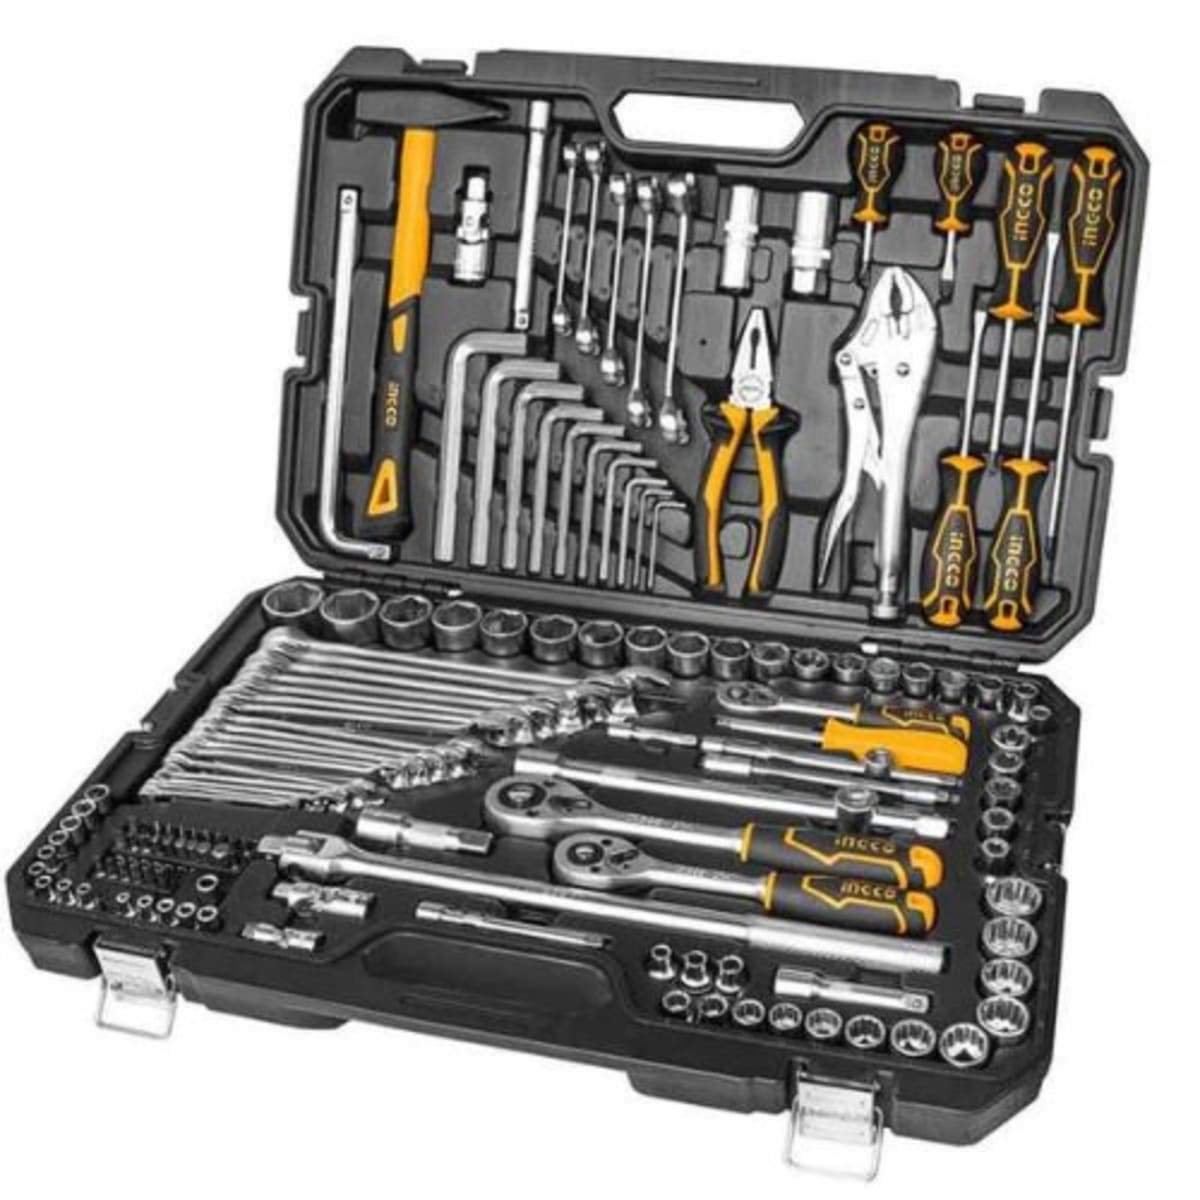 Multifunction Tools Set - 142pieces